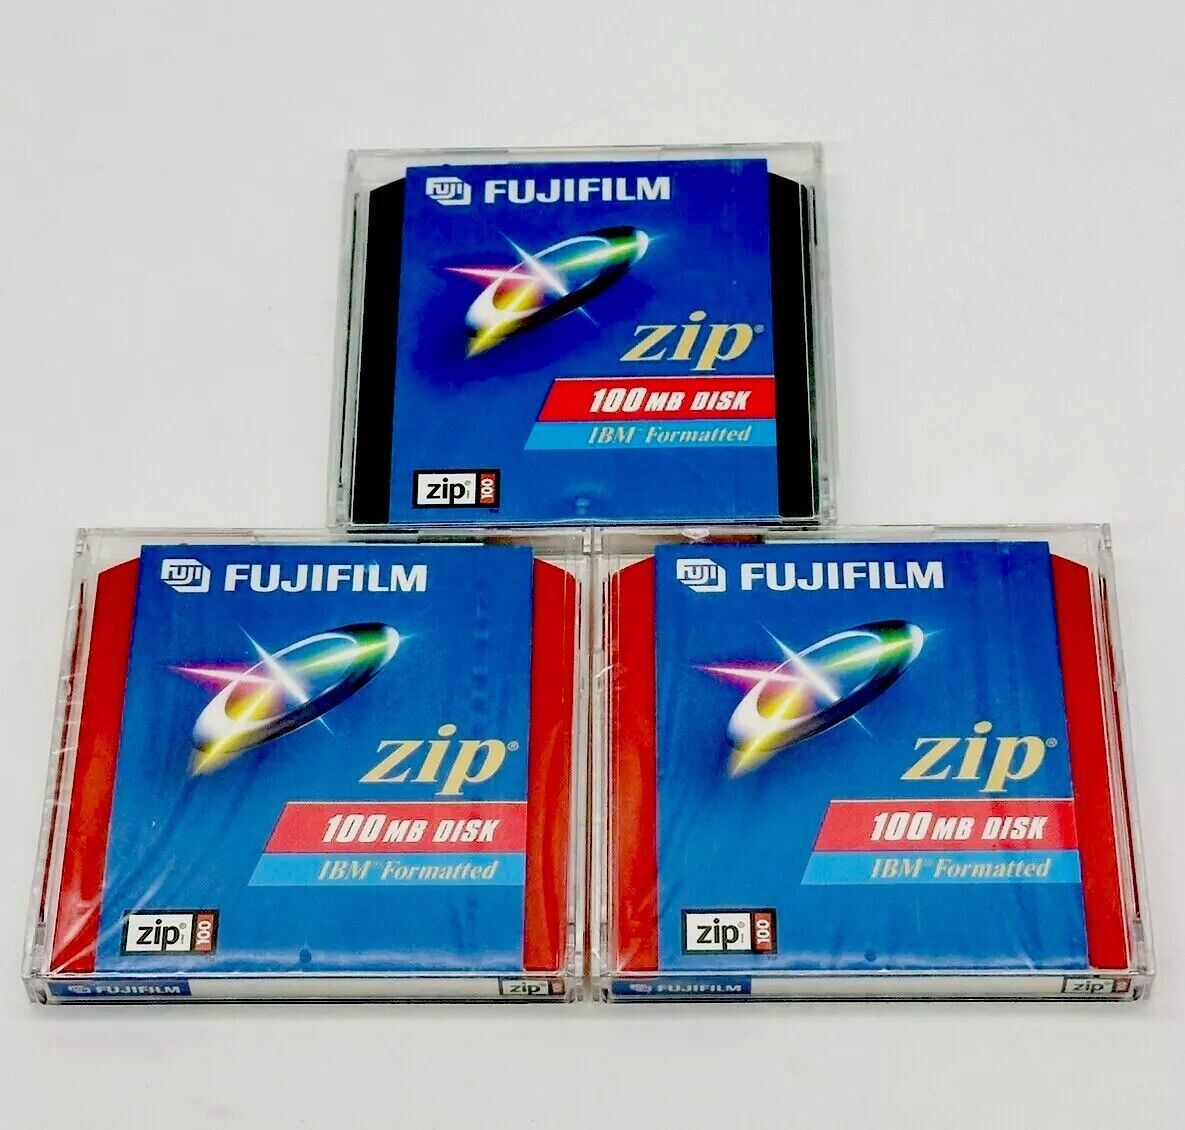 Fujifilm 100MB IBM Formatted ZIP Drive Disks Lot of 3 NEW SEALED SHIPS FAST L@@K